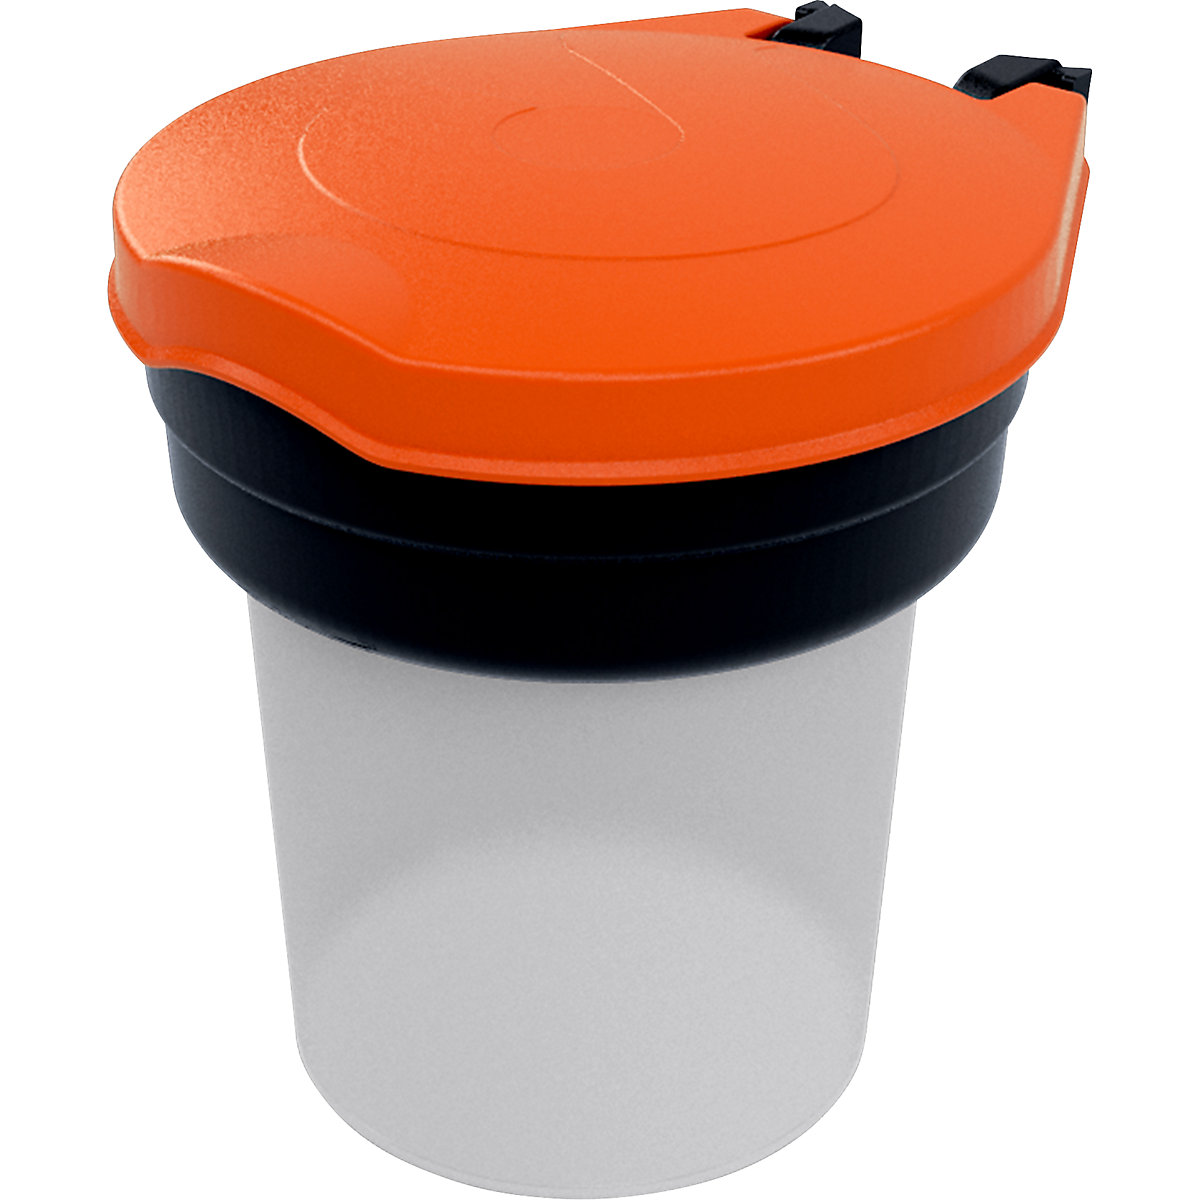 Safety container - Skipper